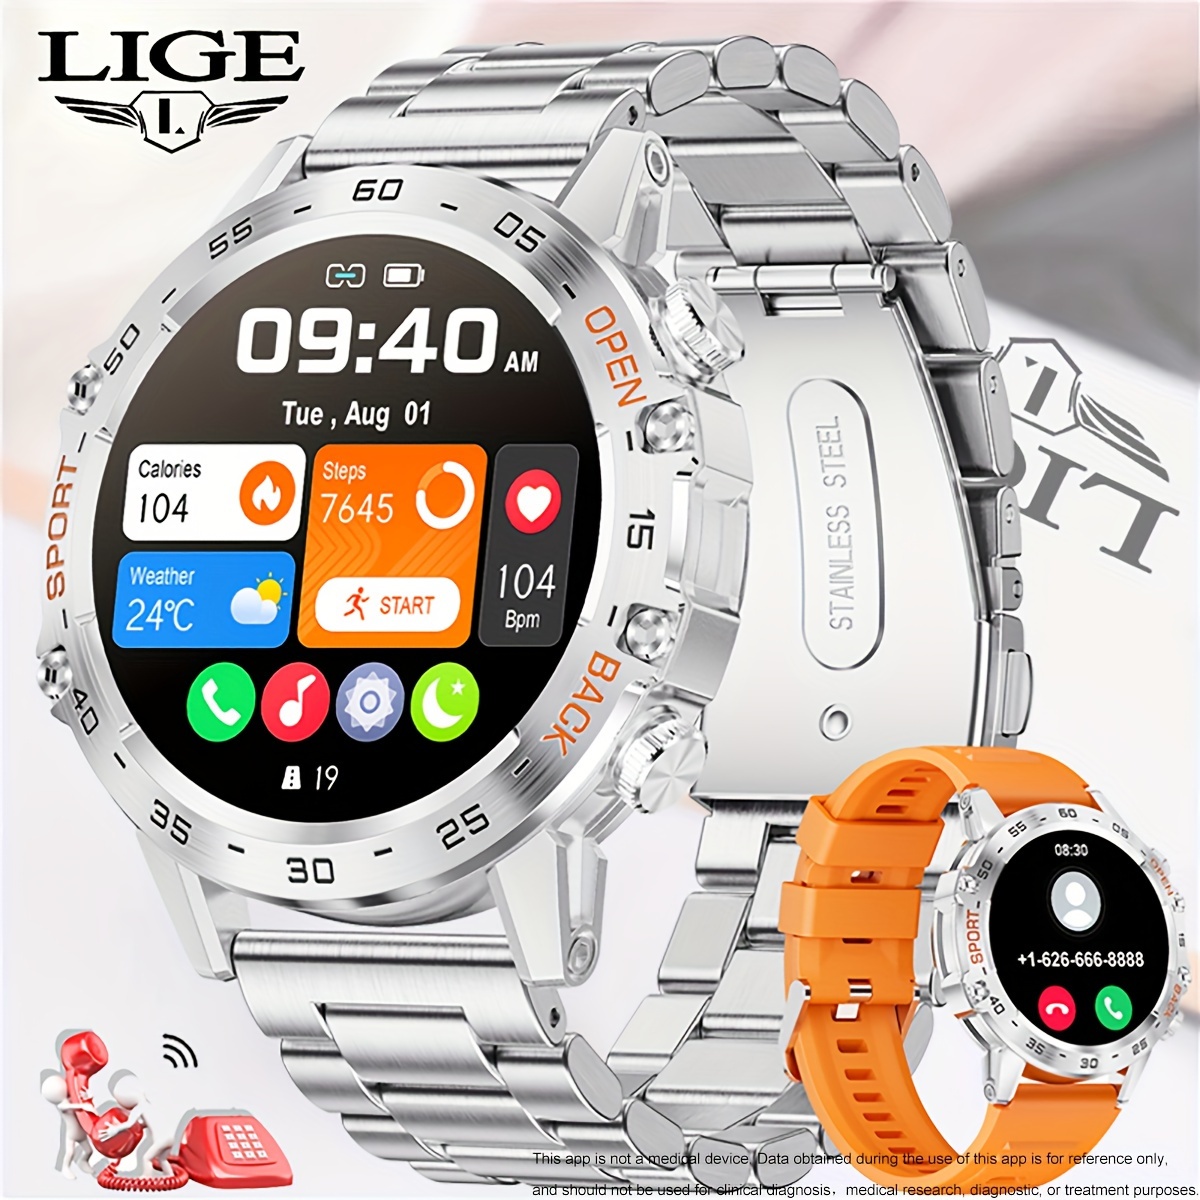 Cool Sport/Fashion LED Watch w/ Touch Ring - gr/rnd, LEDWatchStop